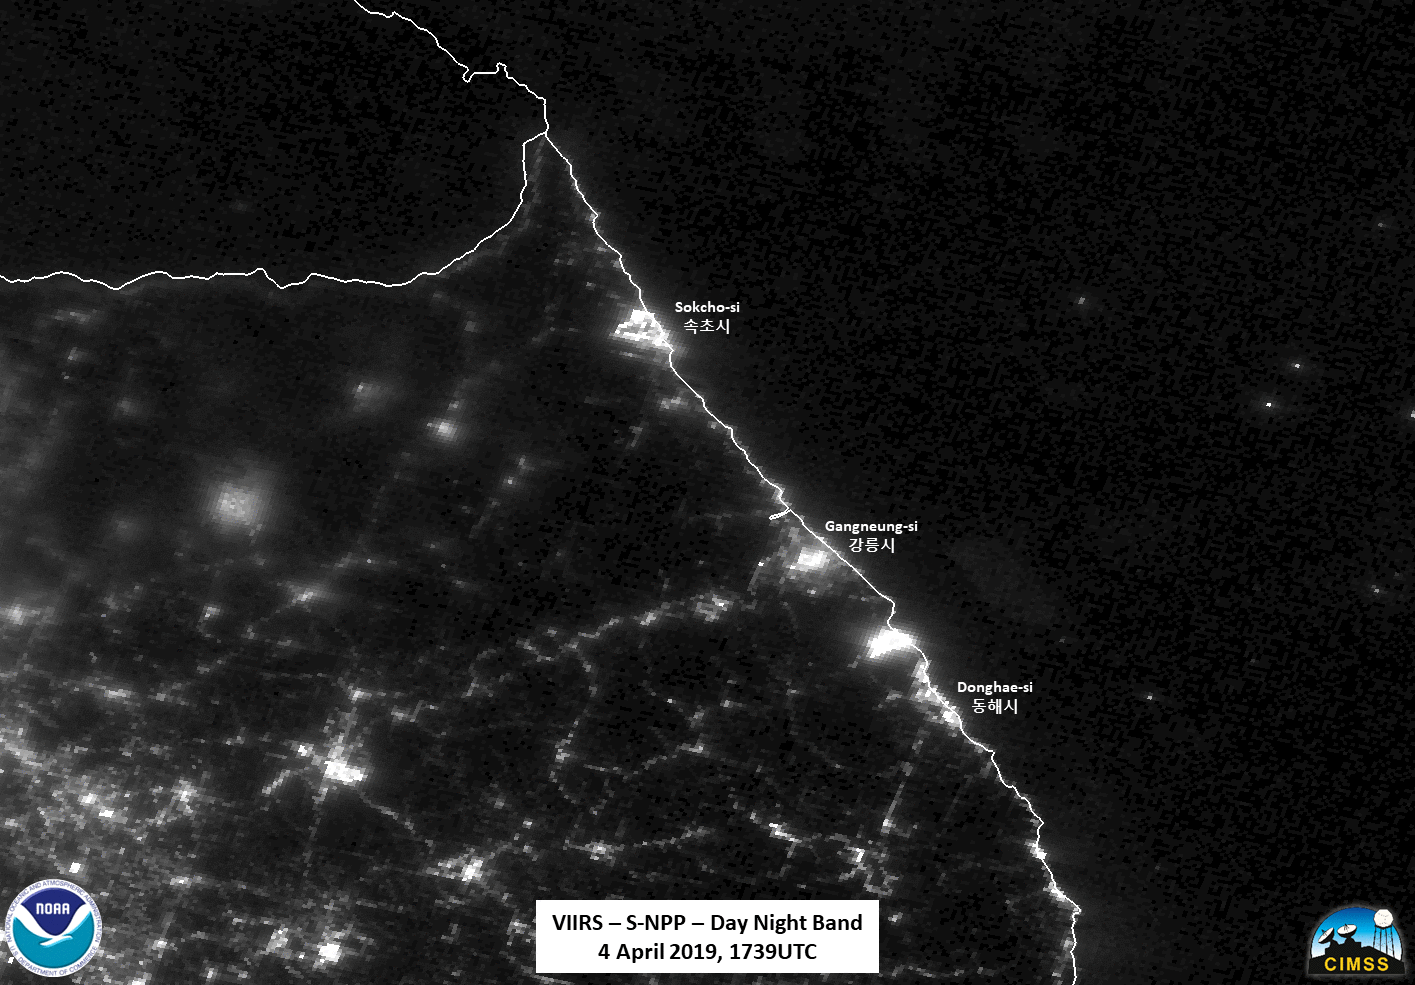 Suomi NPP VIIRS Day/Night Band (0.7 µm), Near-infrared (1.61 µm and 2.24 µm), Shortwave Infrared (3.75 µm and 4.05 µm) and Infrared Window (11.45 µm) images [click to enlarge]